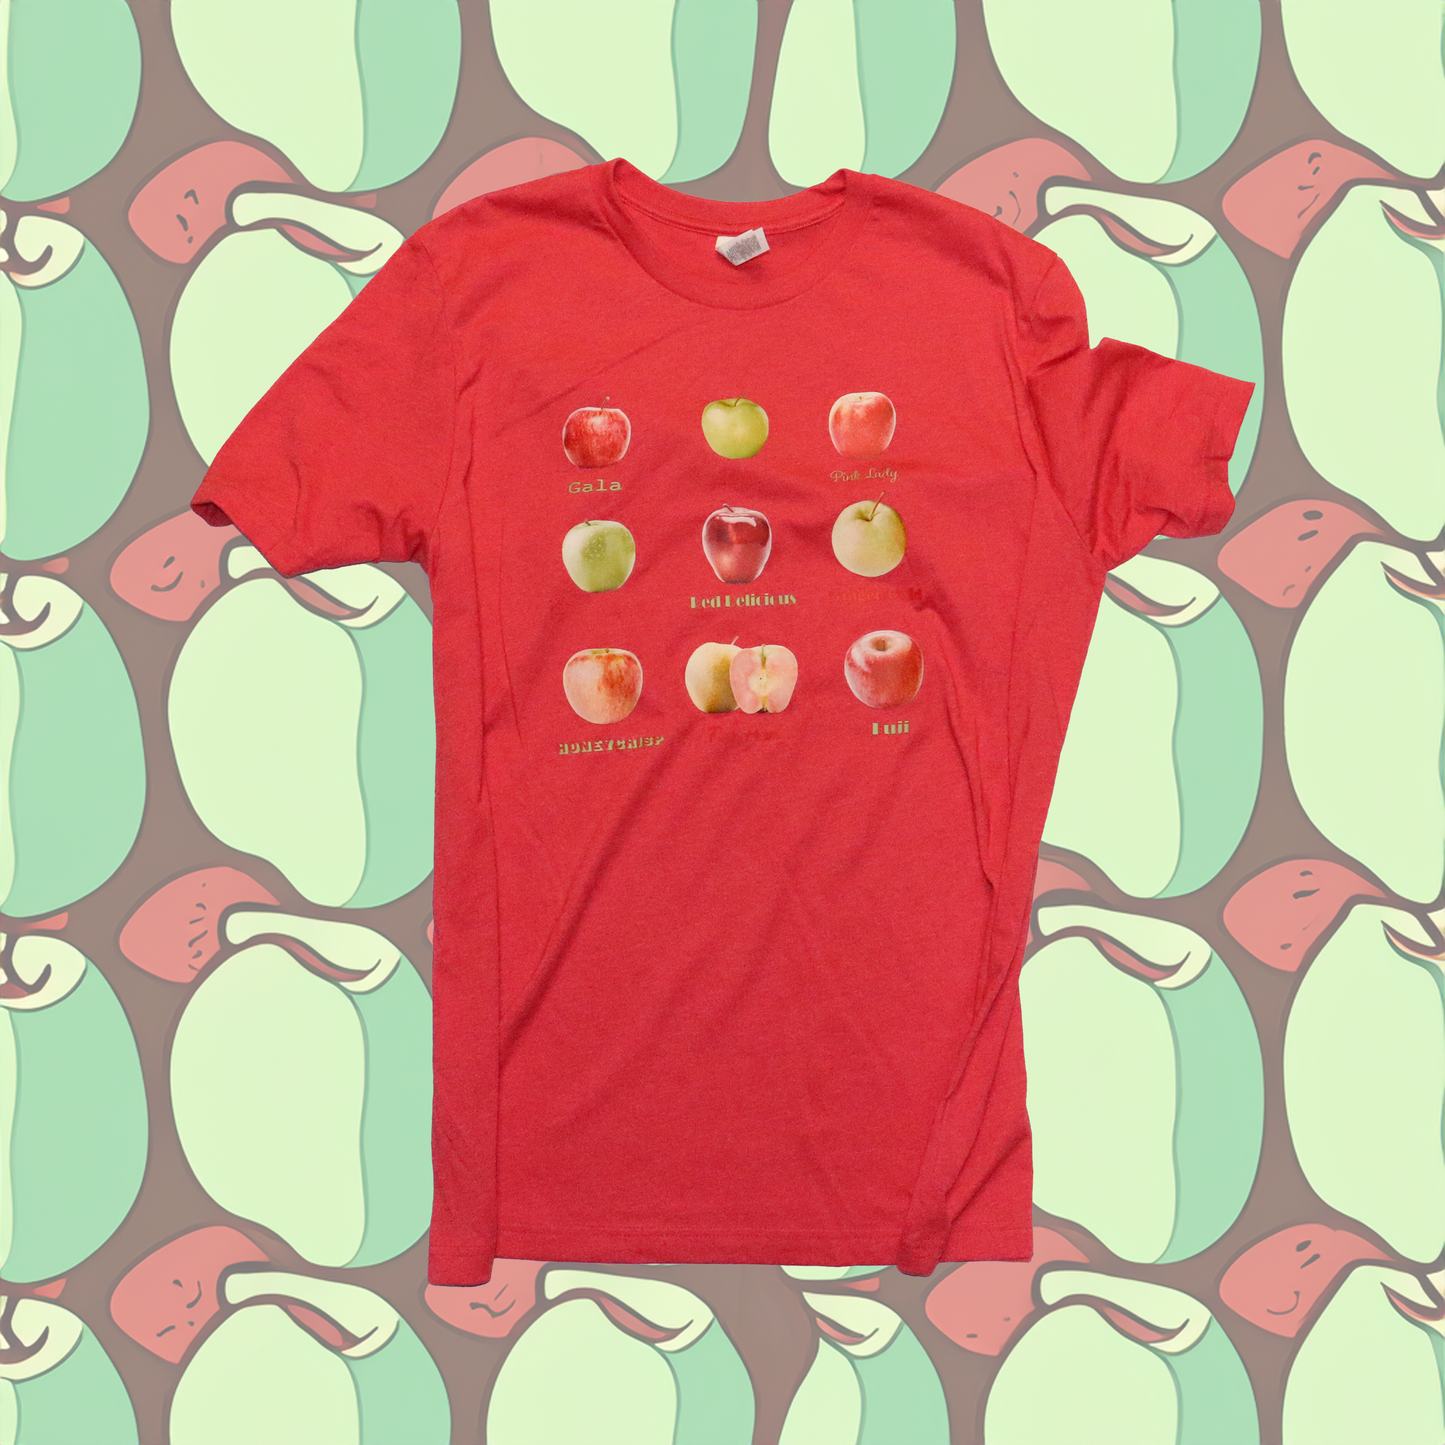 Womens TYPES OF APPLES T-Shirt